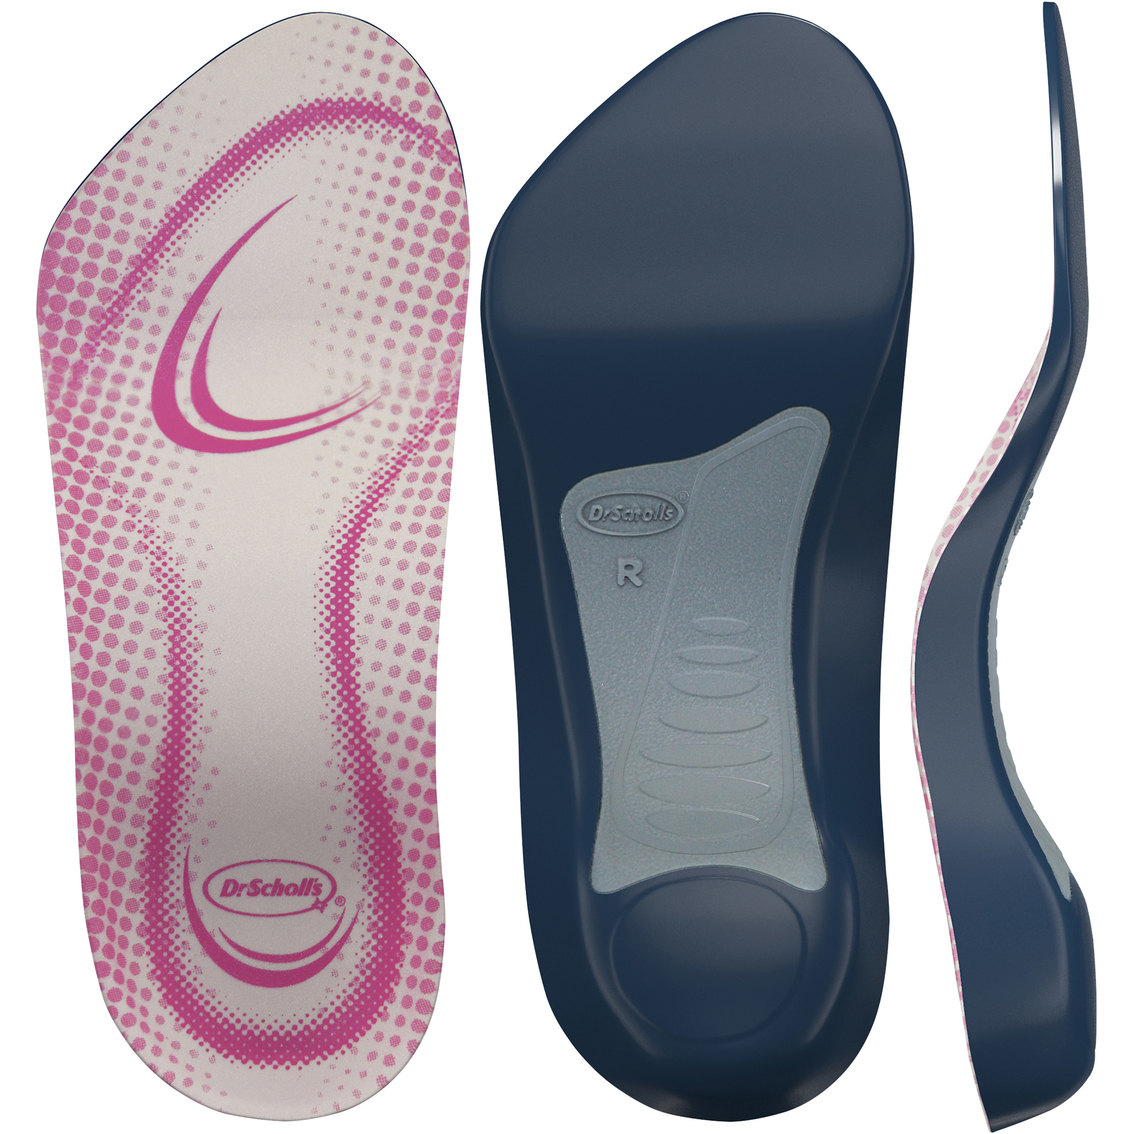 Dr. Scholl's Comfort Tri-Comfort Insoles for Women, 1 Pair - Image 4 of 5